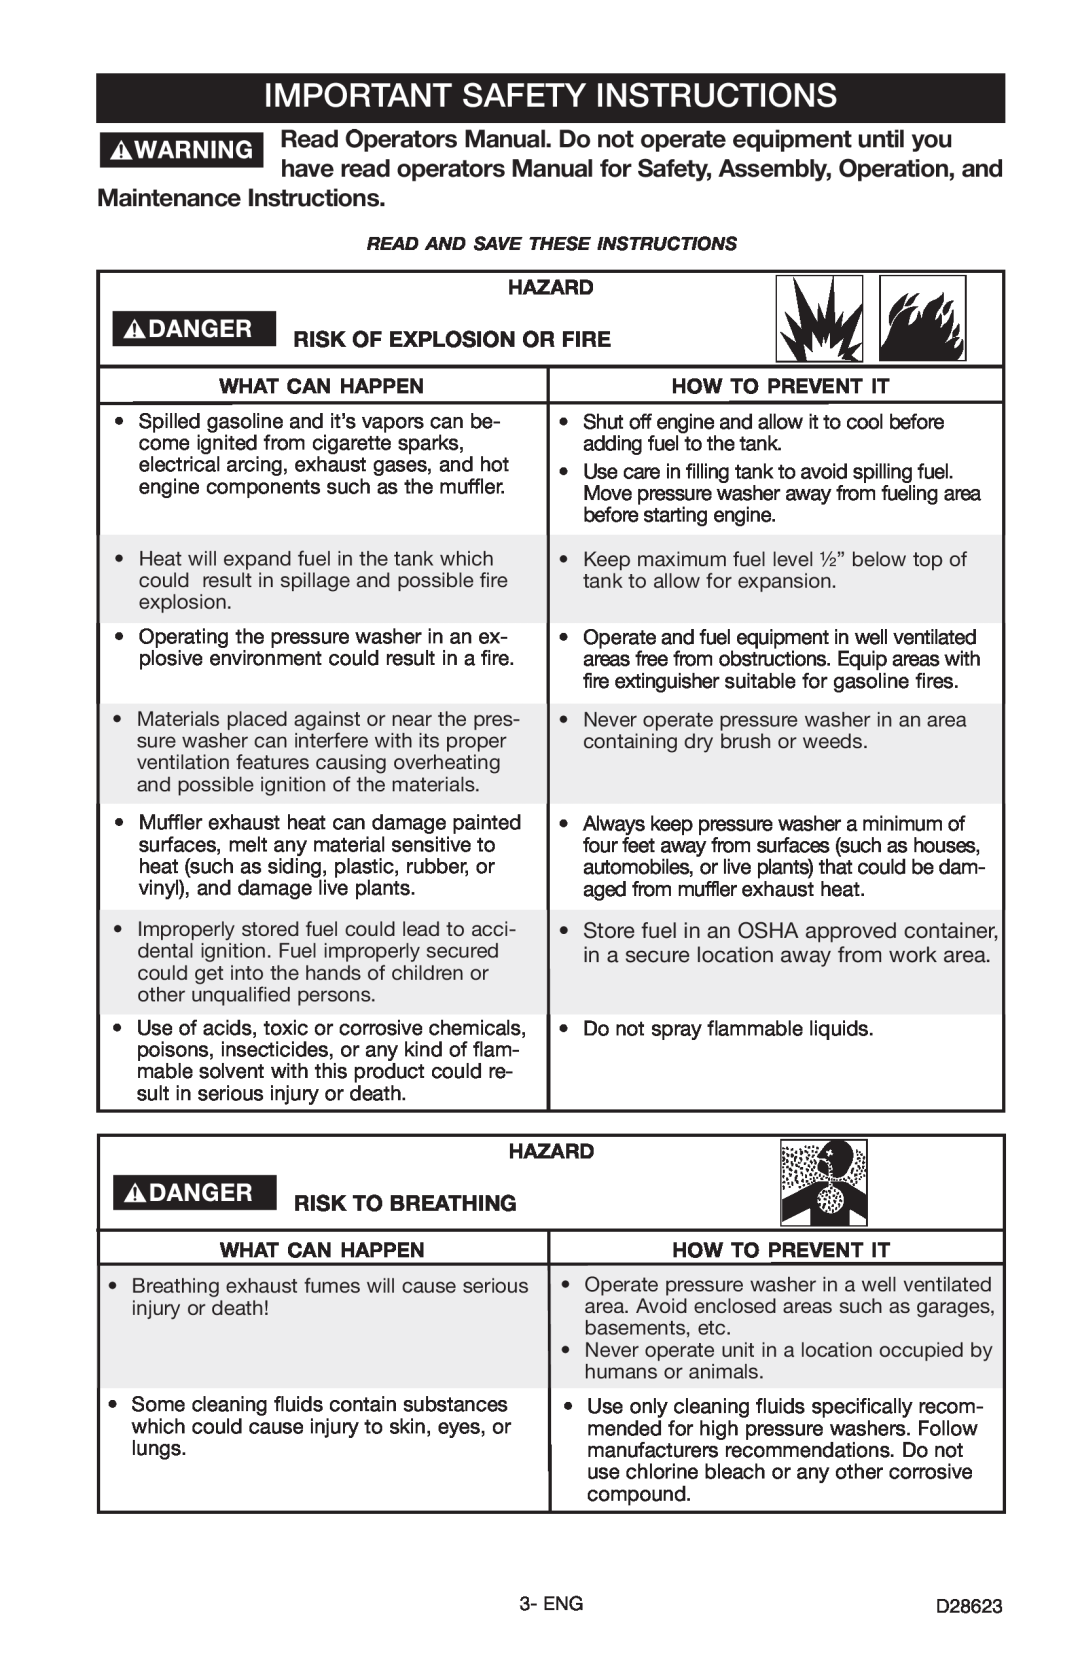 Delta D28623 Important Safety Instructions, Risk Of Explosion Or Fire, Risk To Breathing, Hazard, What Can Happen 